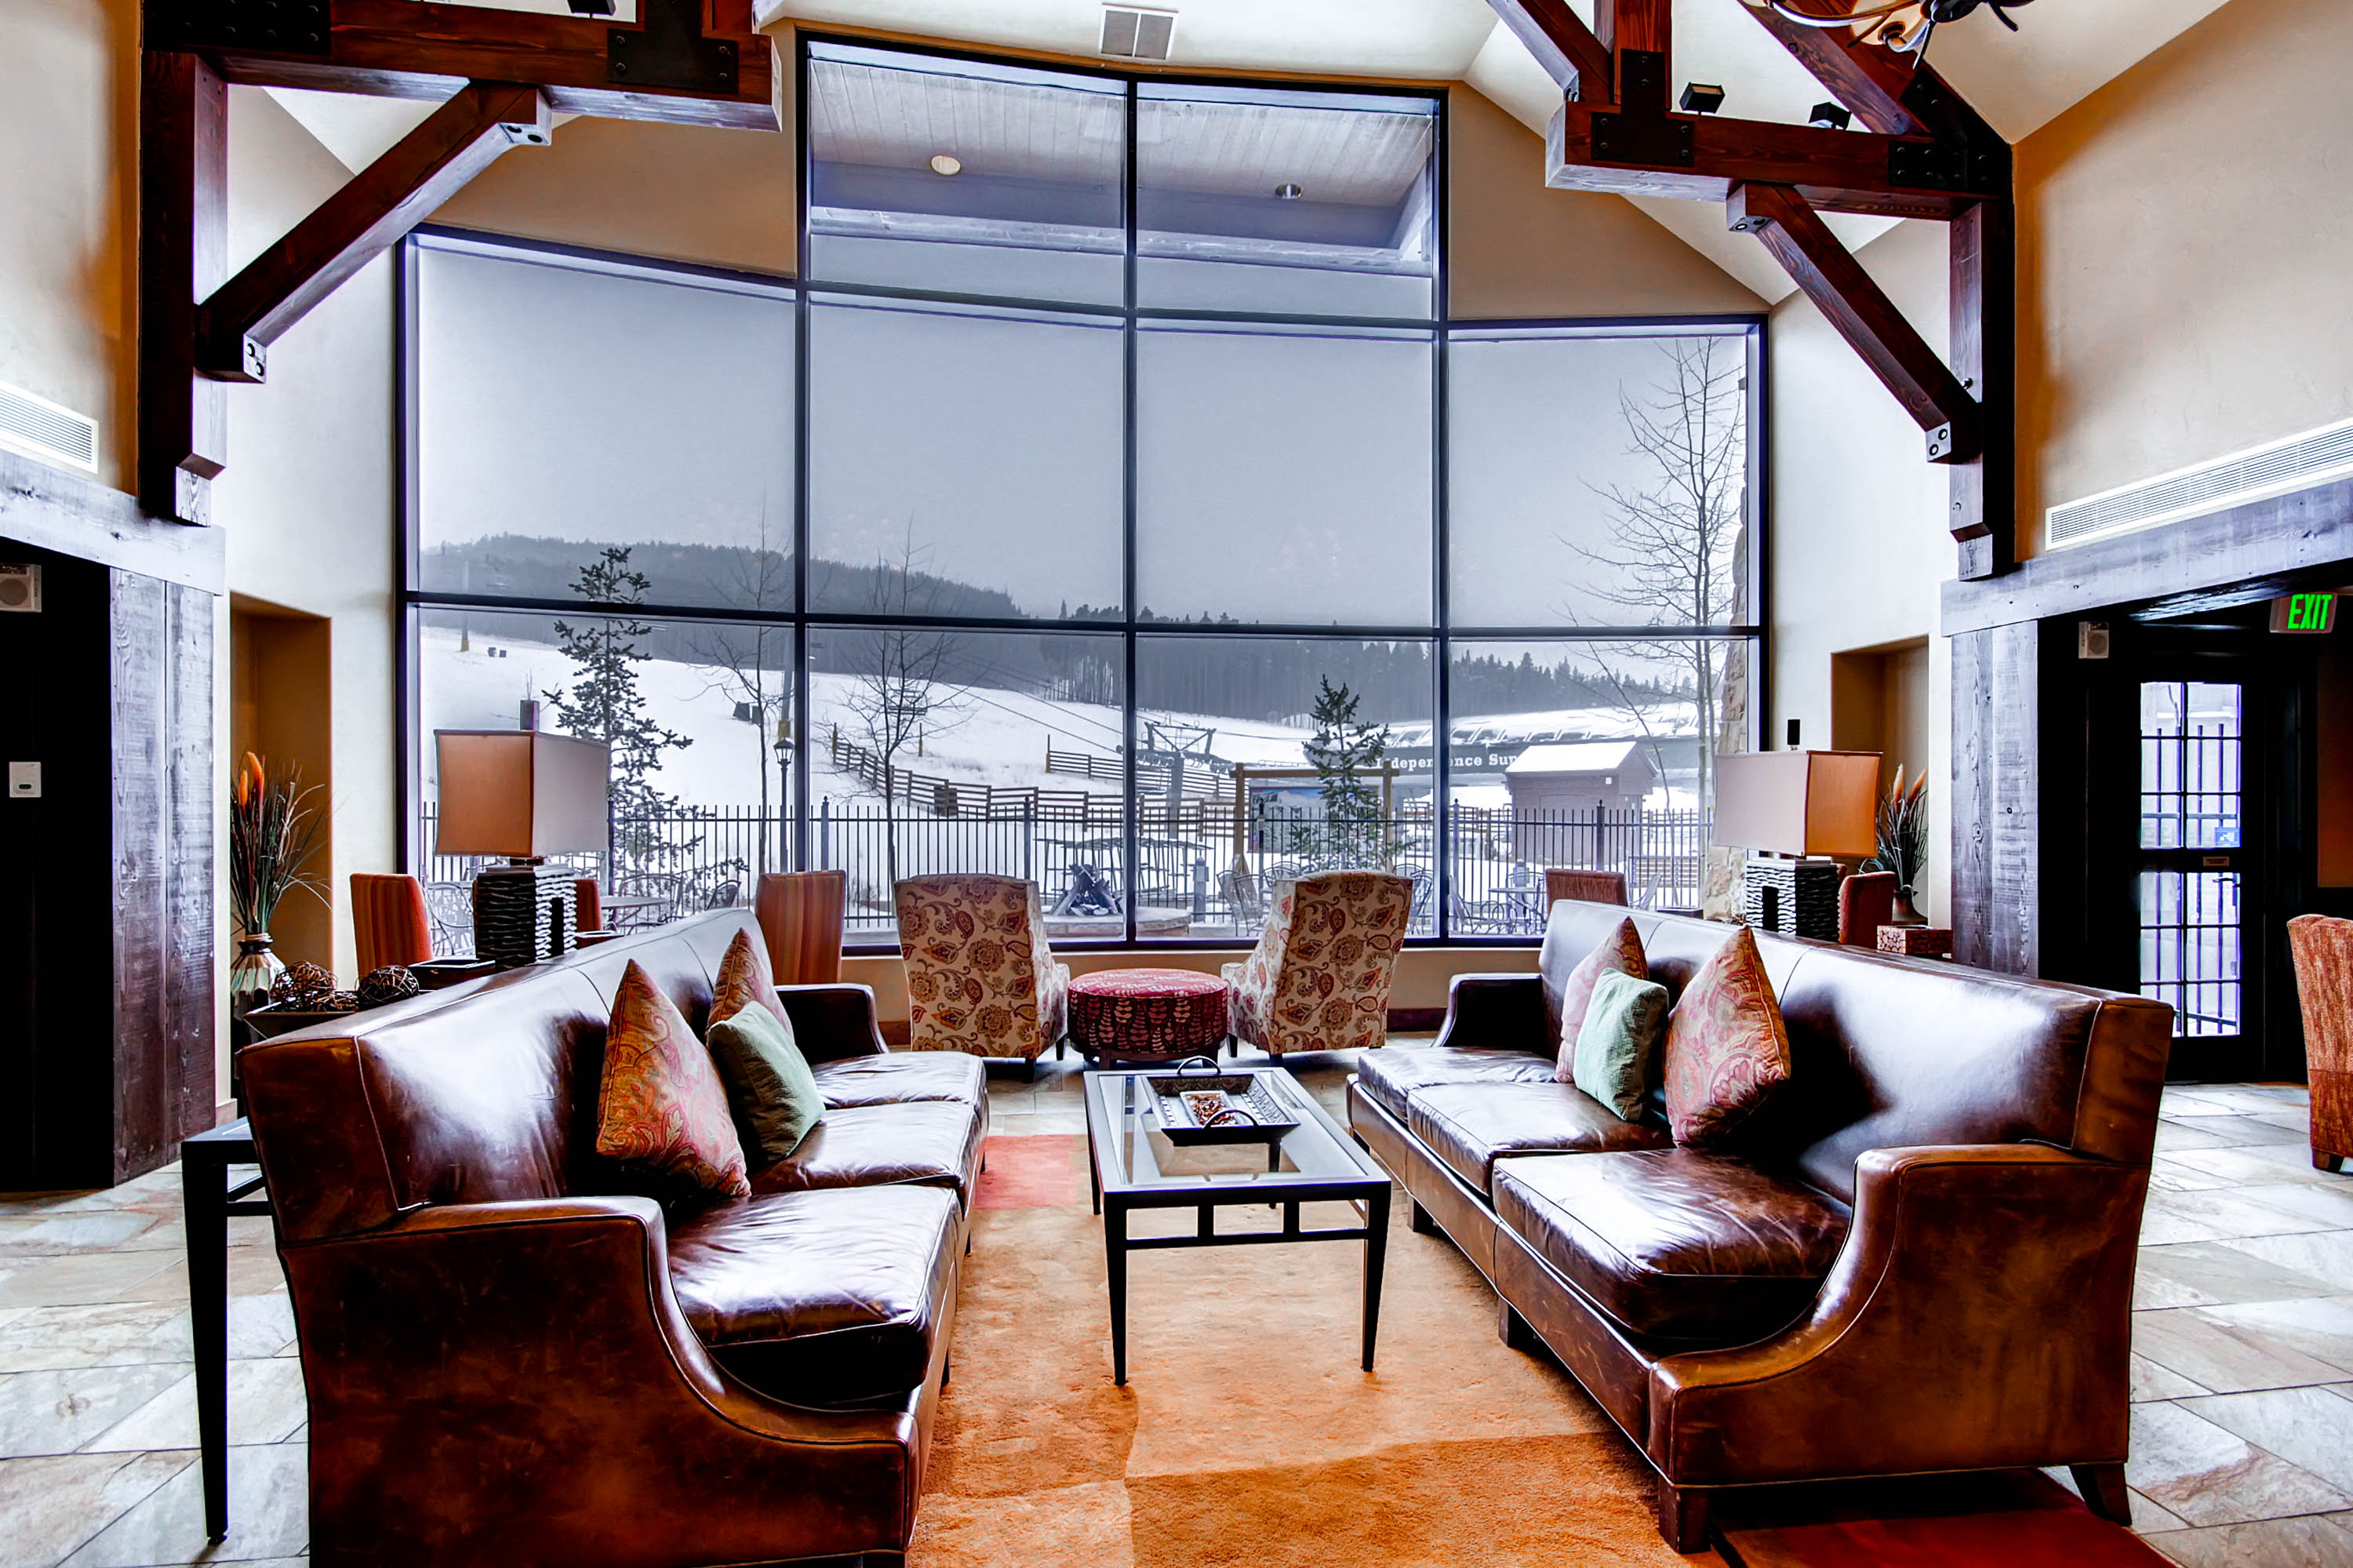 Guests also have access to the amenities at One Ski Hill Place.